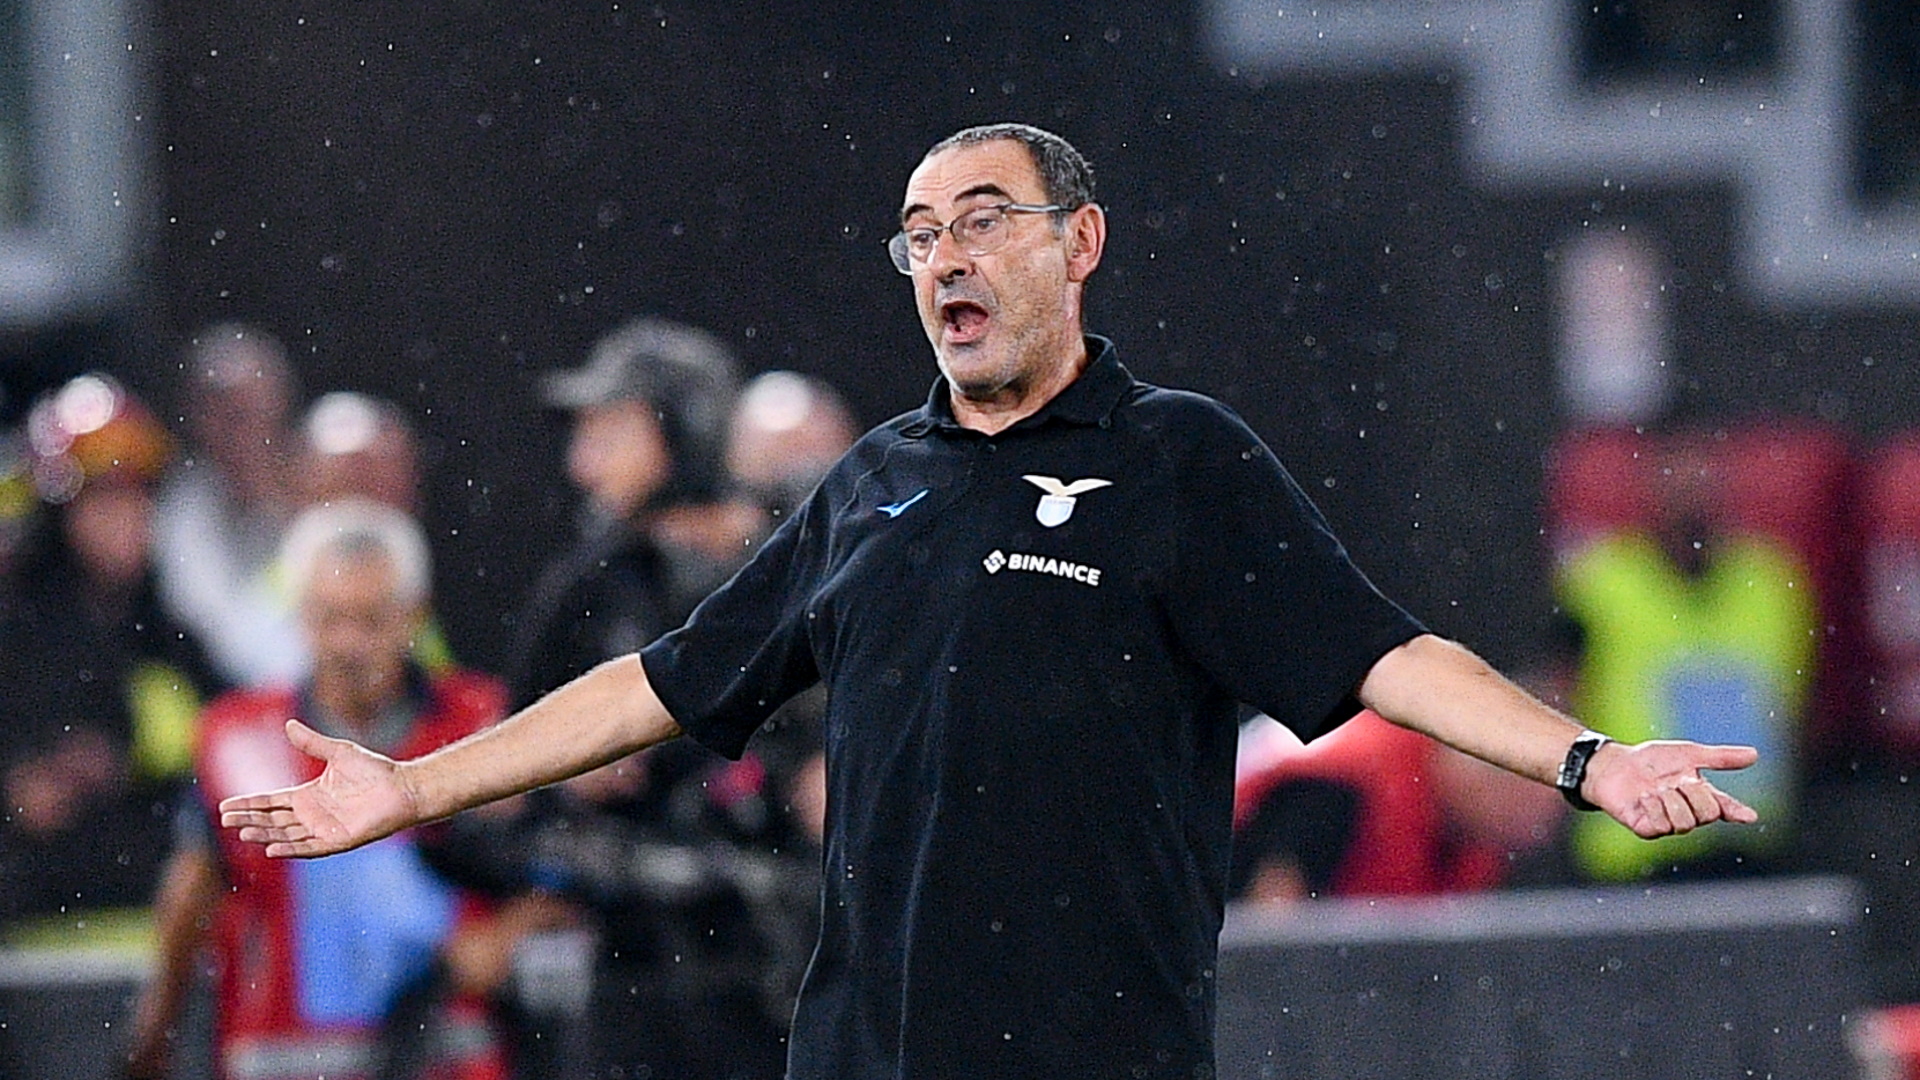 Maurizio Sarri is sure to stay put for seasons to come after he expressed his love for Lazio, revealing that the club has ‘invaded’ his life.